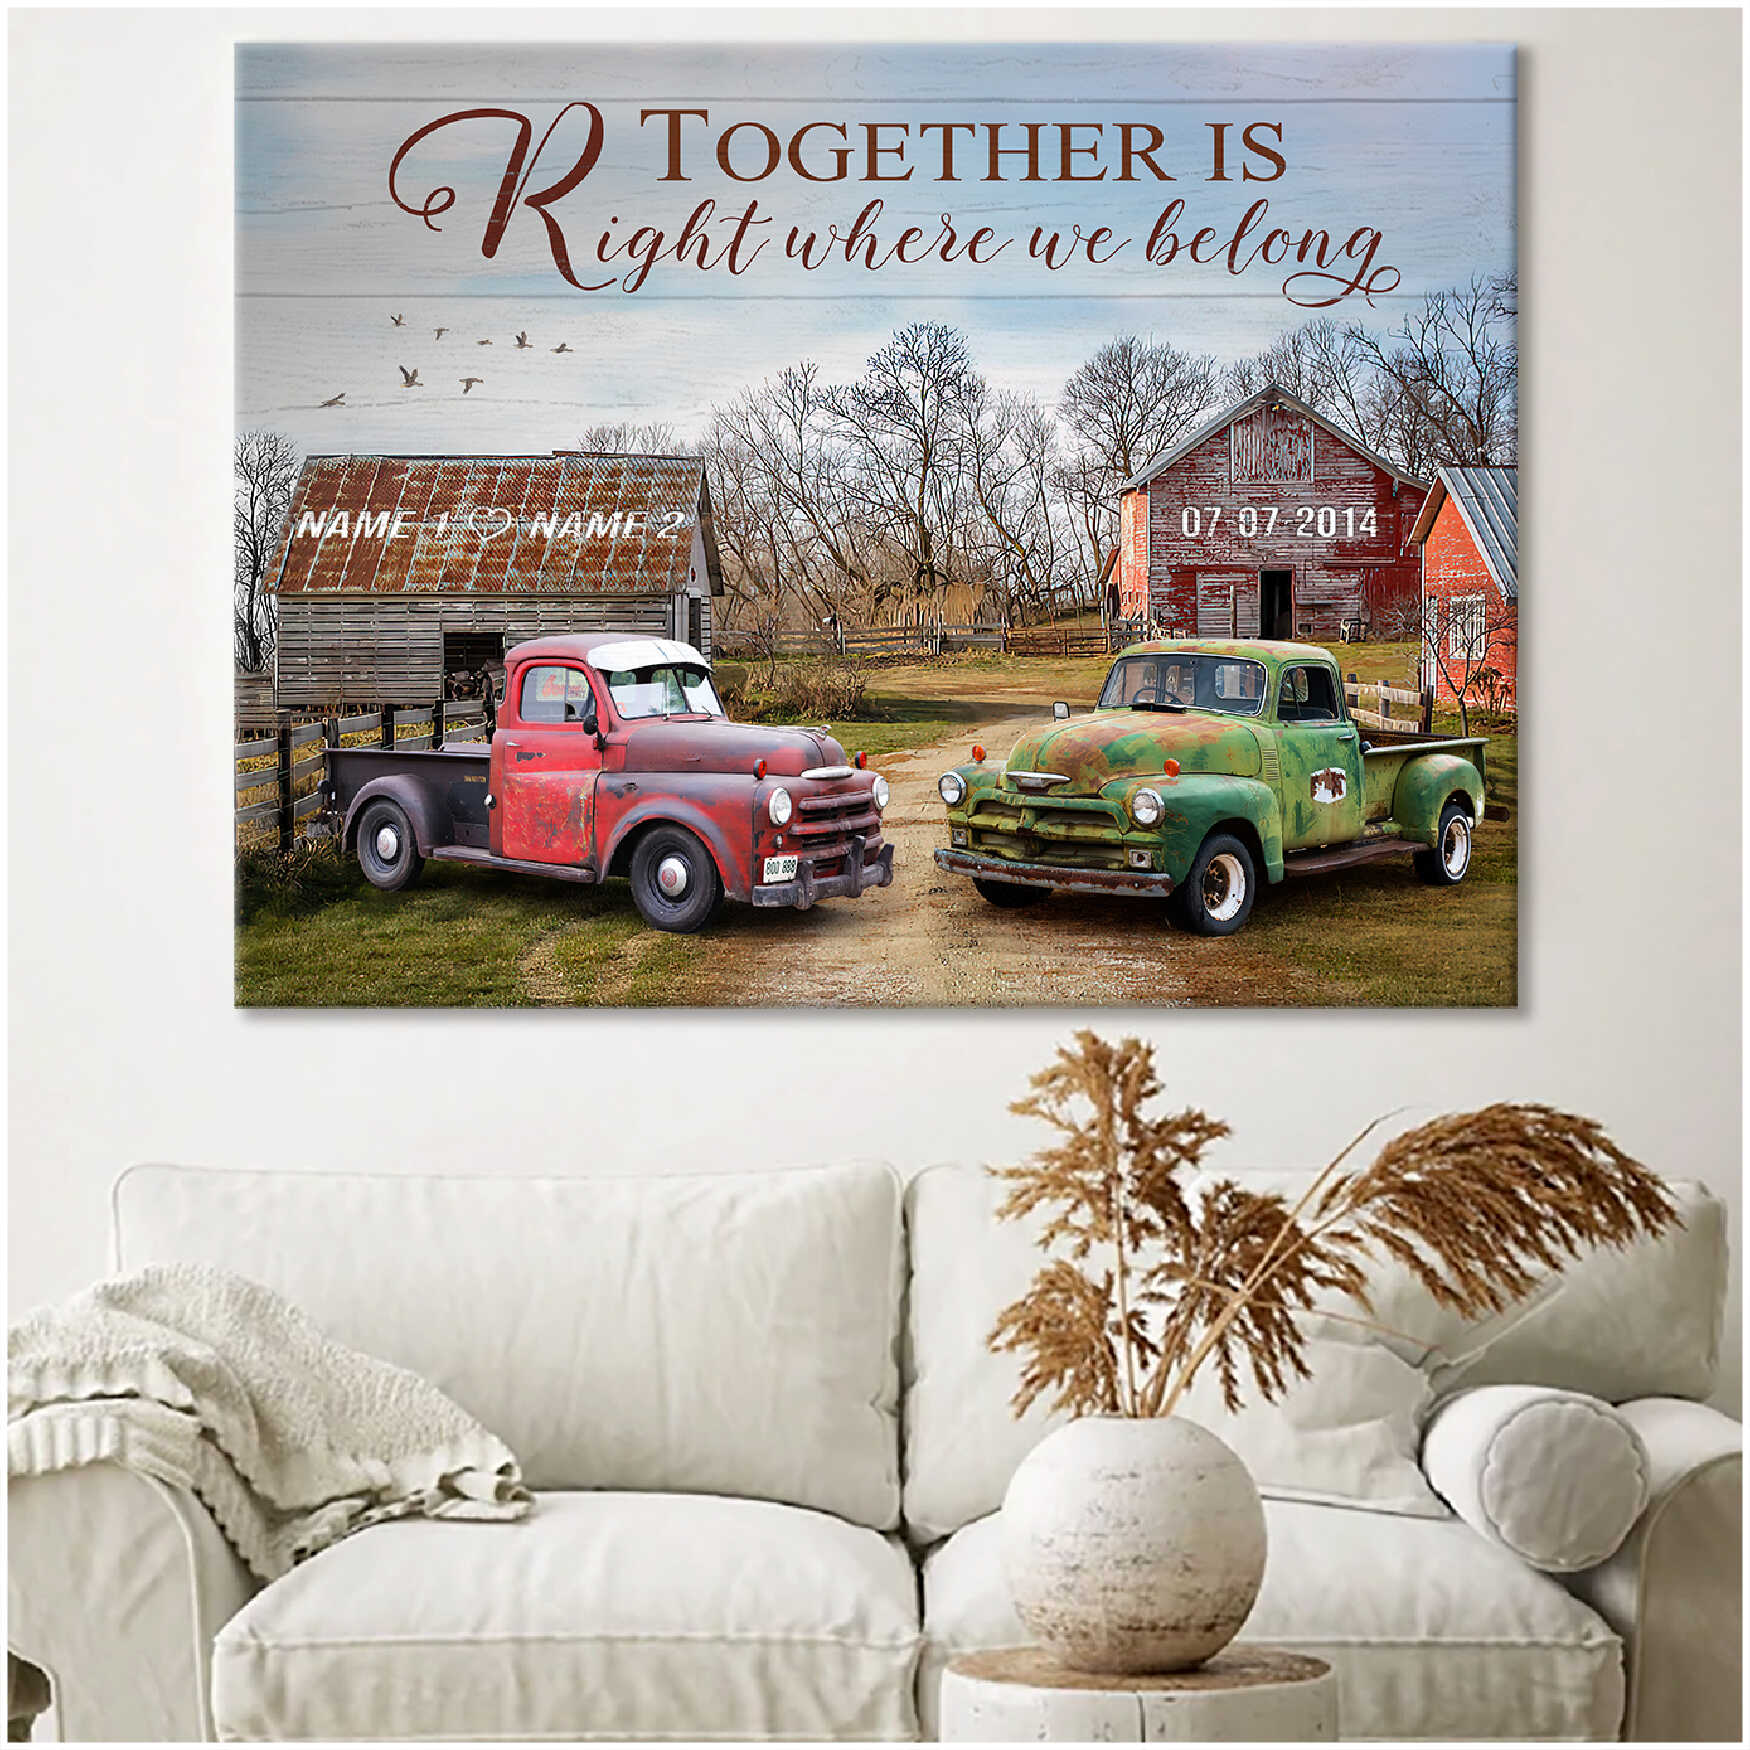 Romantic Personalized Country Living And Couple Rustic Pick Up Truck Together Is Right Where We Belong Custom Name And Date Farmhouse Canvas Prints Wall Art Decor